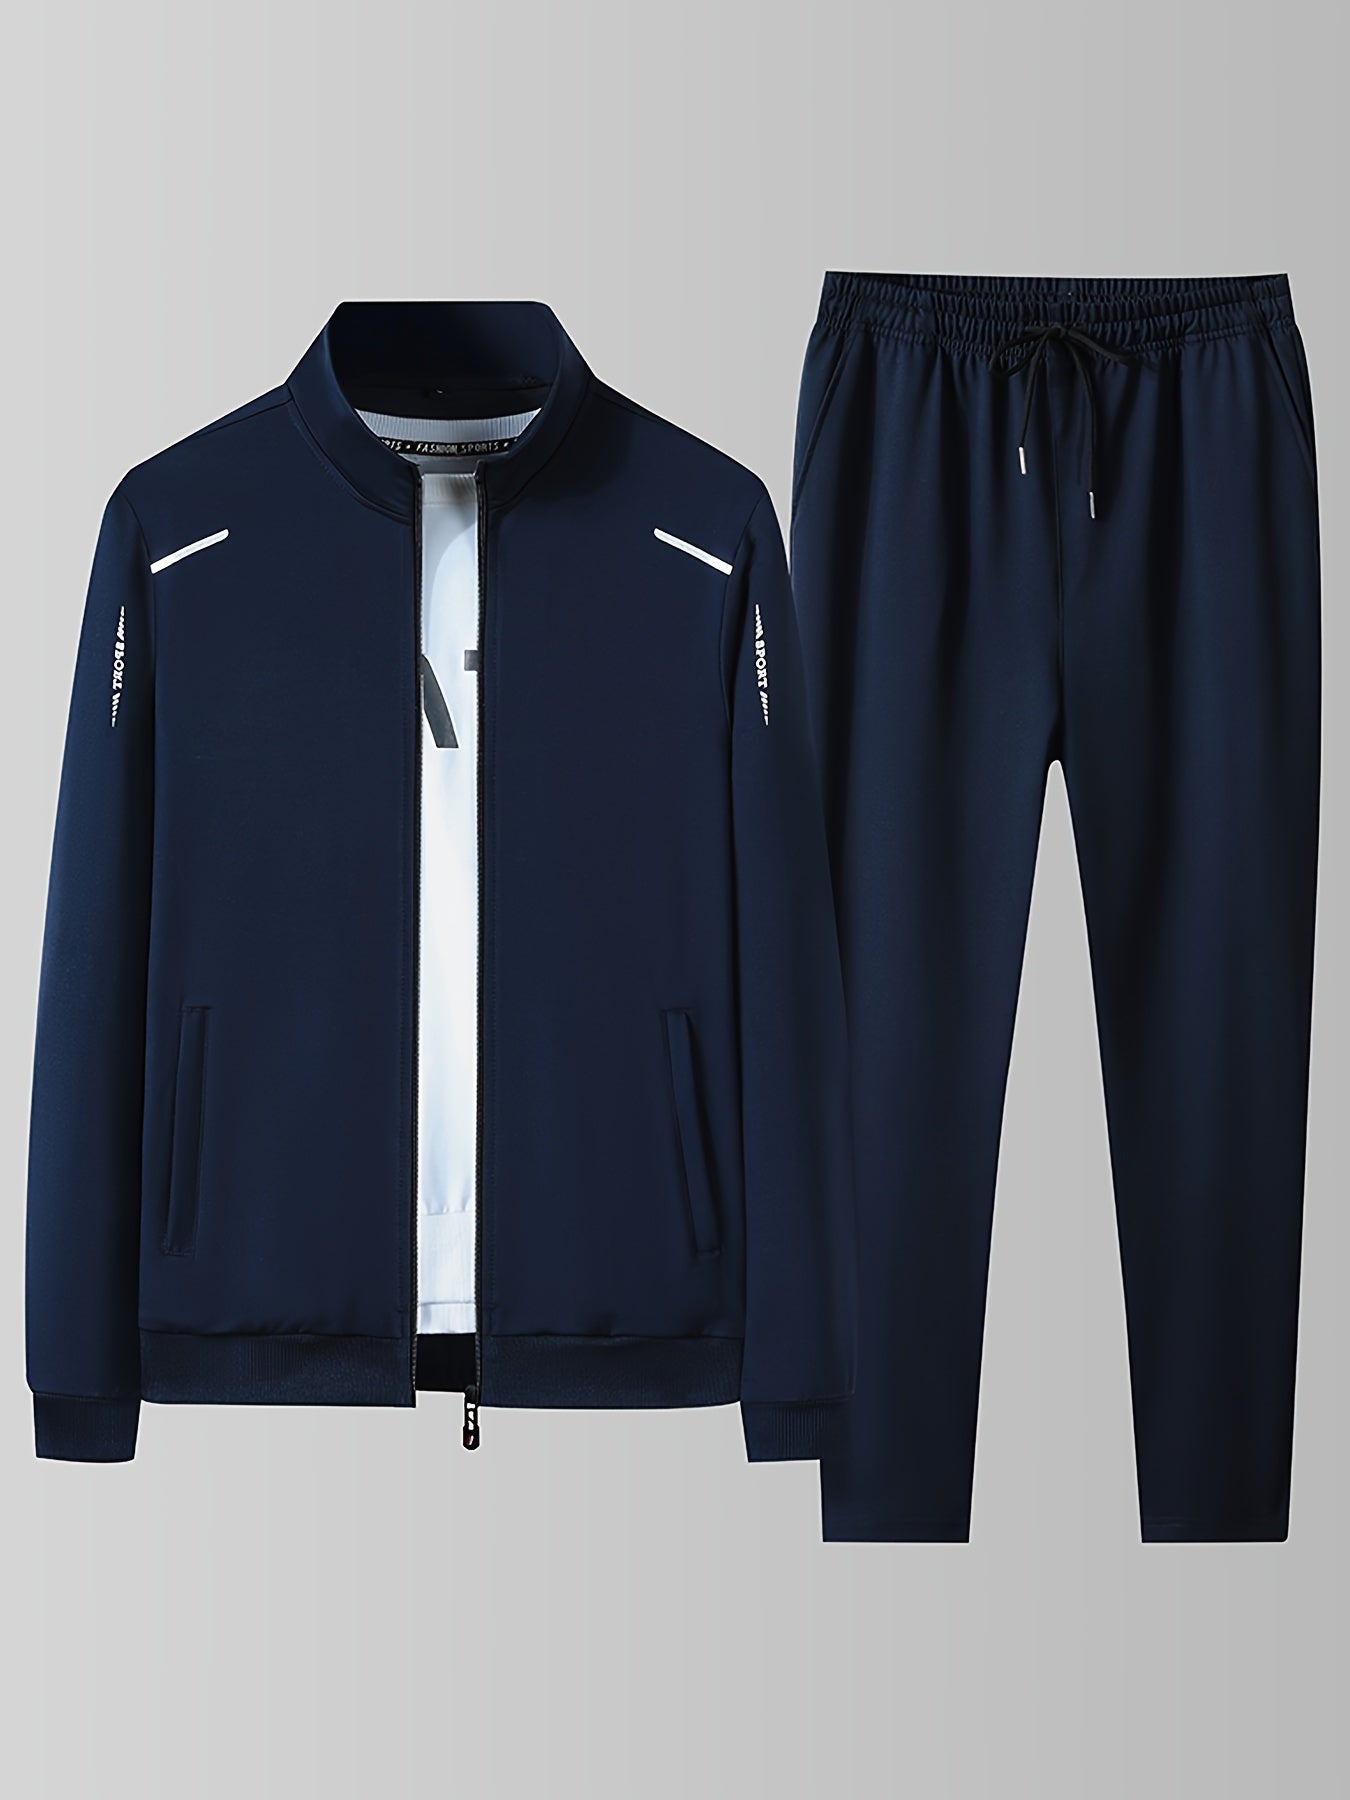 Fleece men's athletic tracksuit in solid color with stretch fabric and pockets, ideal for sports and casual wear